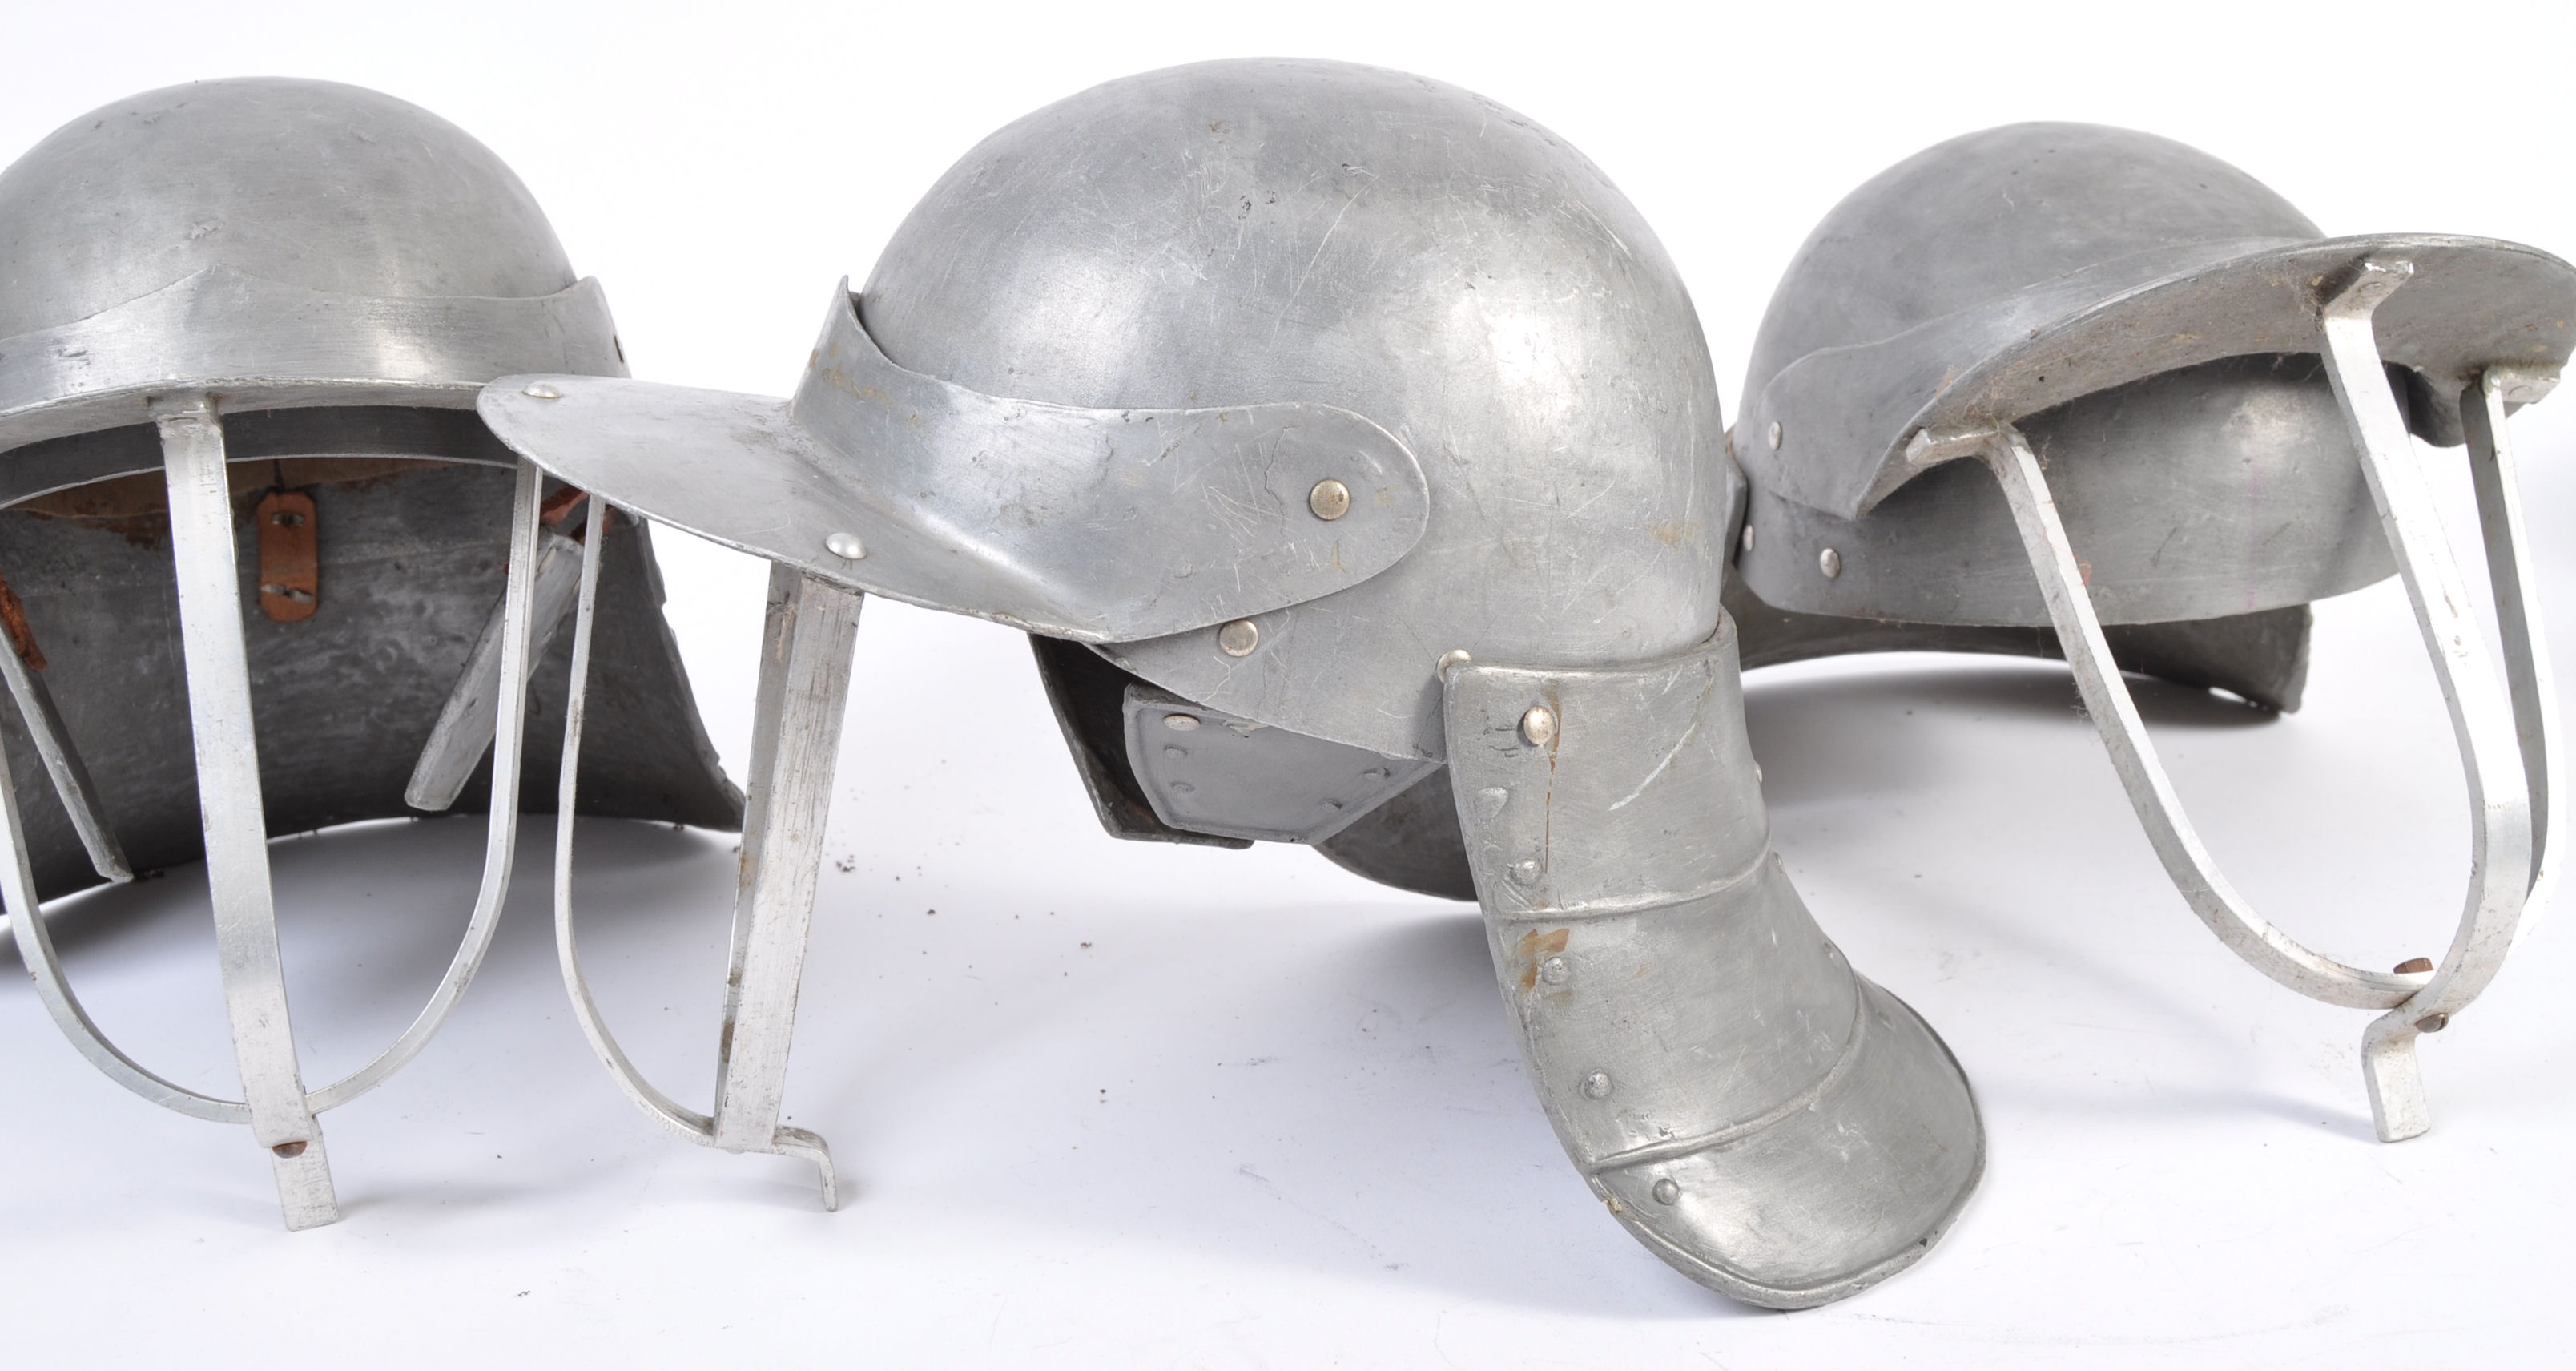 UNIFORMS AND FANCY DRESS - A COLLECTION OF FOUR MEDIEVAL KNIGHTS HELMETS. - Image 5 of 6